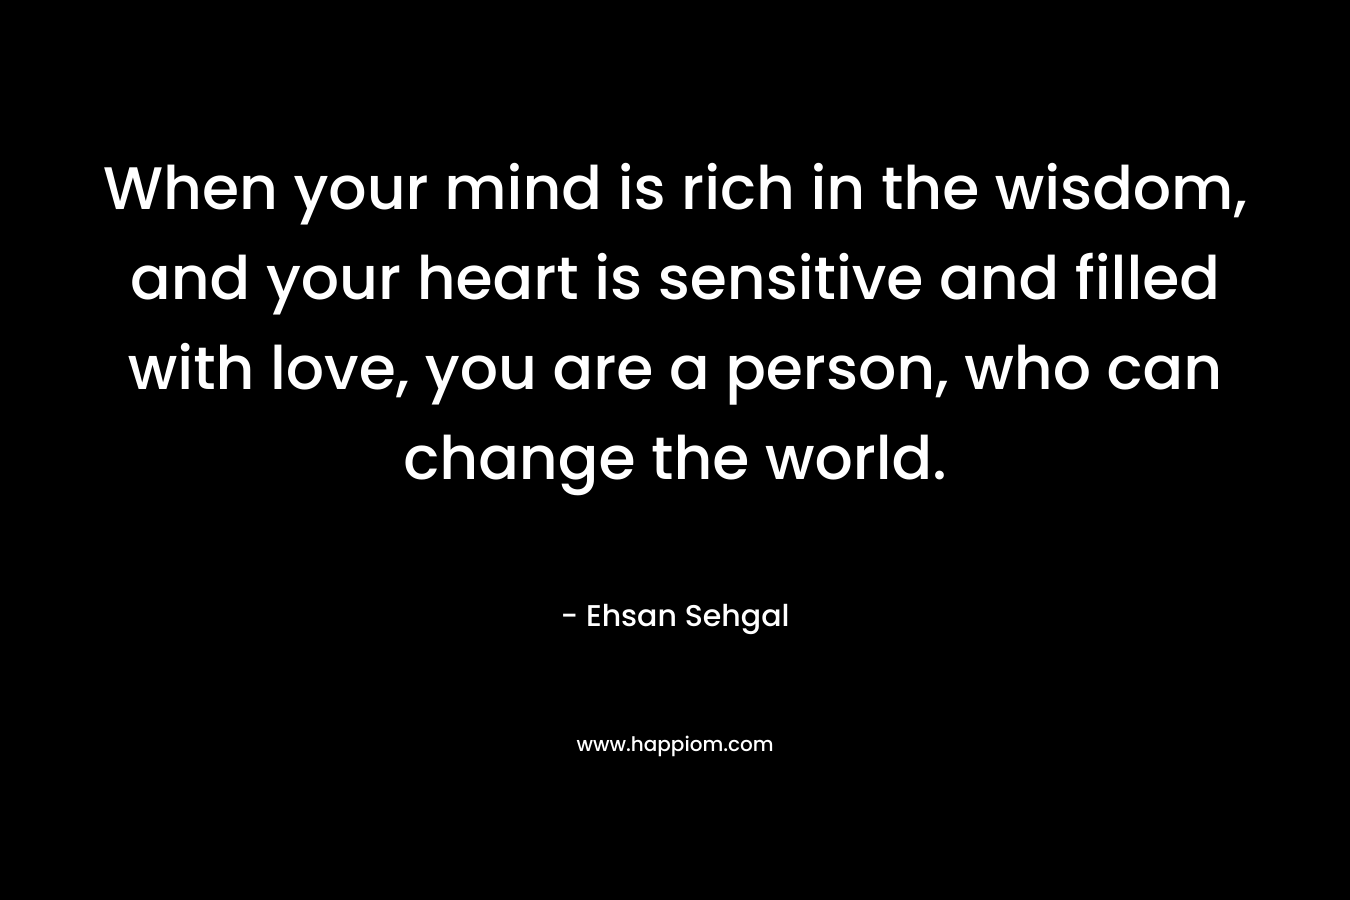 When your mind is rich in the wisdom, and your heart is sensitive and filled with love, you are a person, who can change the world.